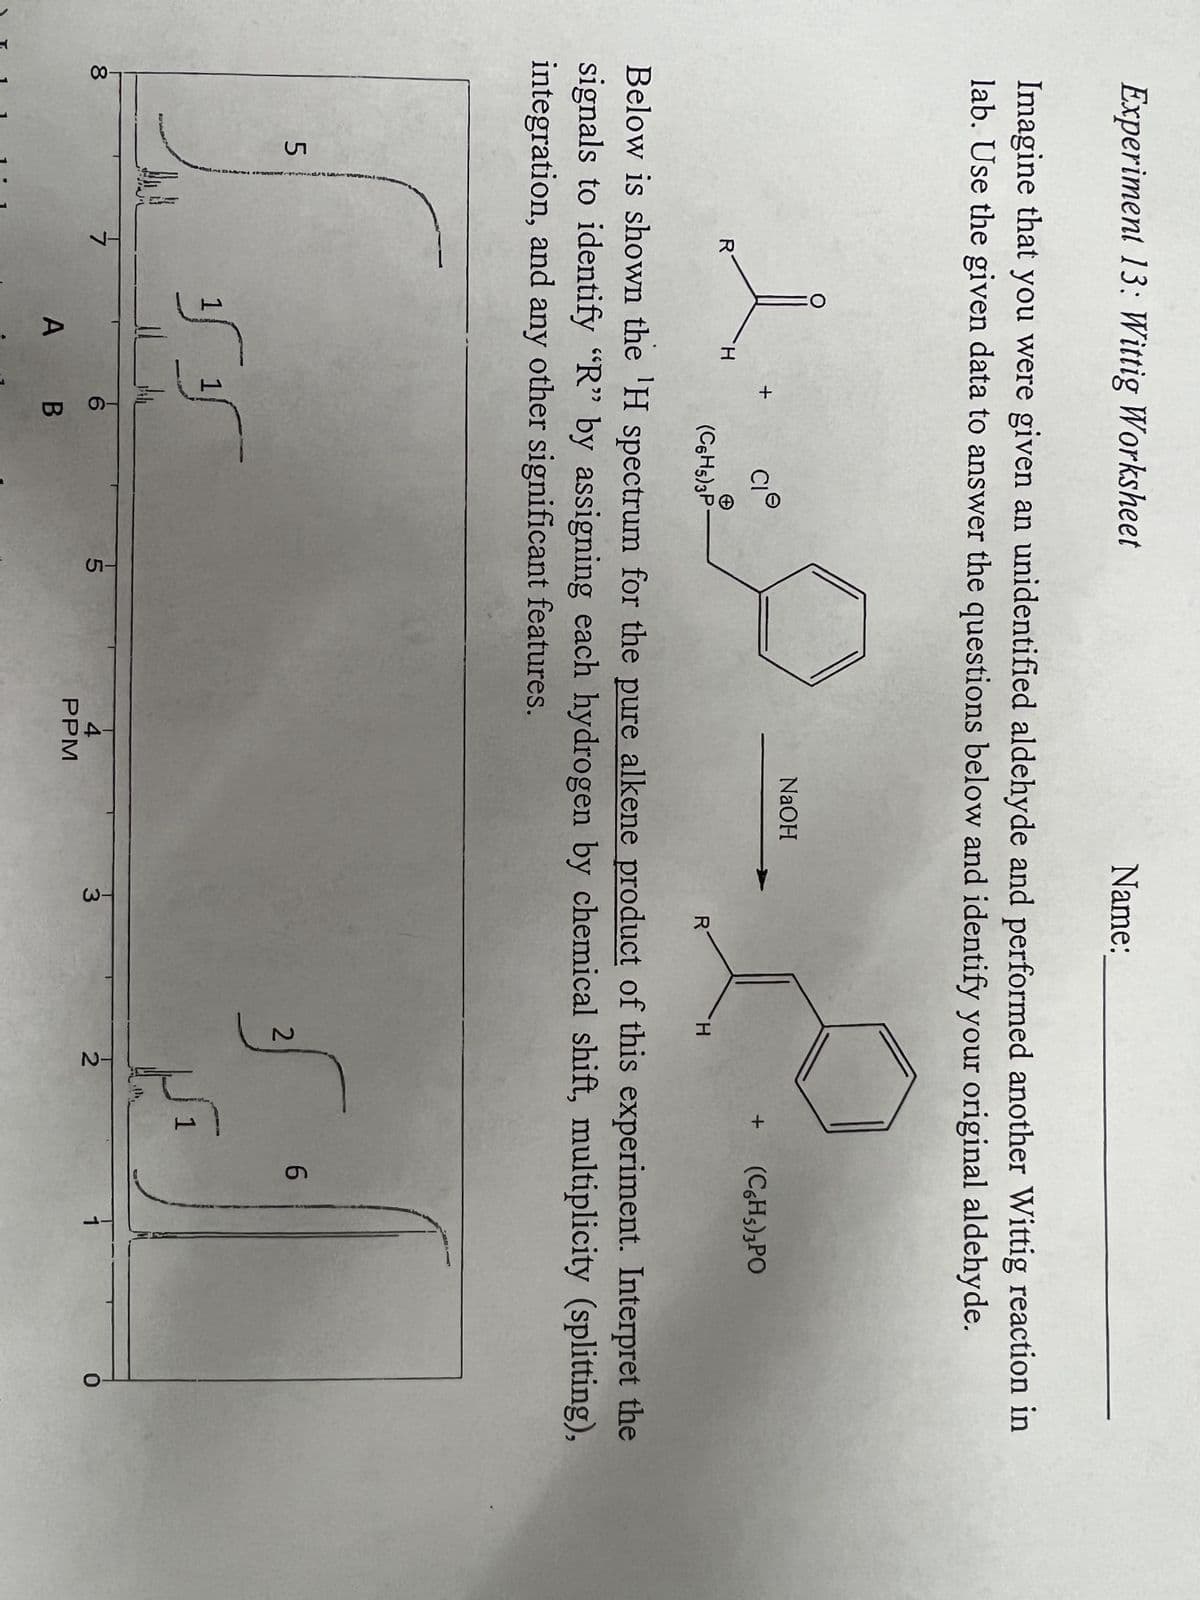 Experiment 13: Wittig Worksheet
Imagine that you were given an unidentified aldehyde and performed another Wittig reaction in
lab. Use the given data to answer the questions below and identify your original aldehyde.
-80
5
Diver
R
L&
Ha
O
H
+
15 1
CI
6
A B
(C6H5)3P-
Below is shown the 'H spectrum for the pure alkene product of this experiment. Interpret the
signals to identify "R" by assigning each hydrogen by chemical shift, multiplicity (splitting),
integration, and any other significant features.
15
Name:
NaOH
4
РРМ
E
+
H
T3
R
20
2
2
5
(C6H5)3PO
1
6
1
0